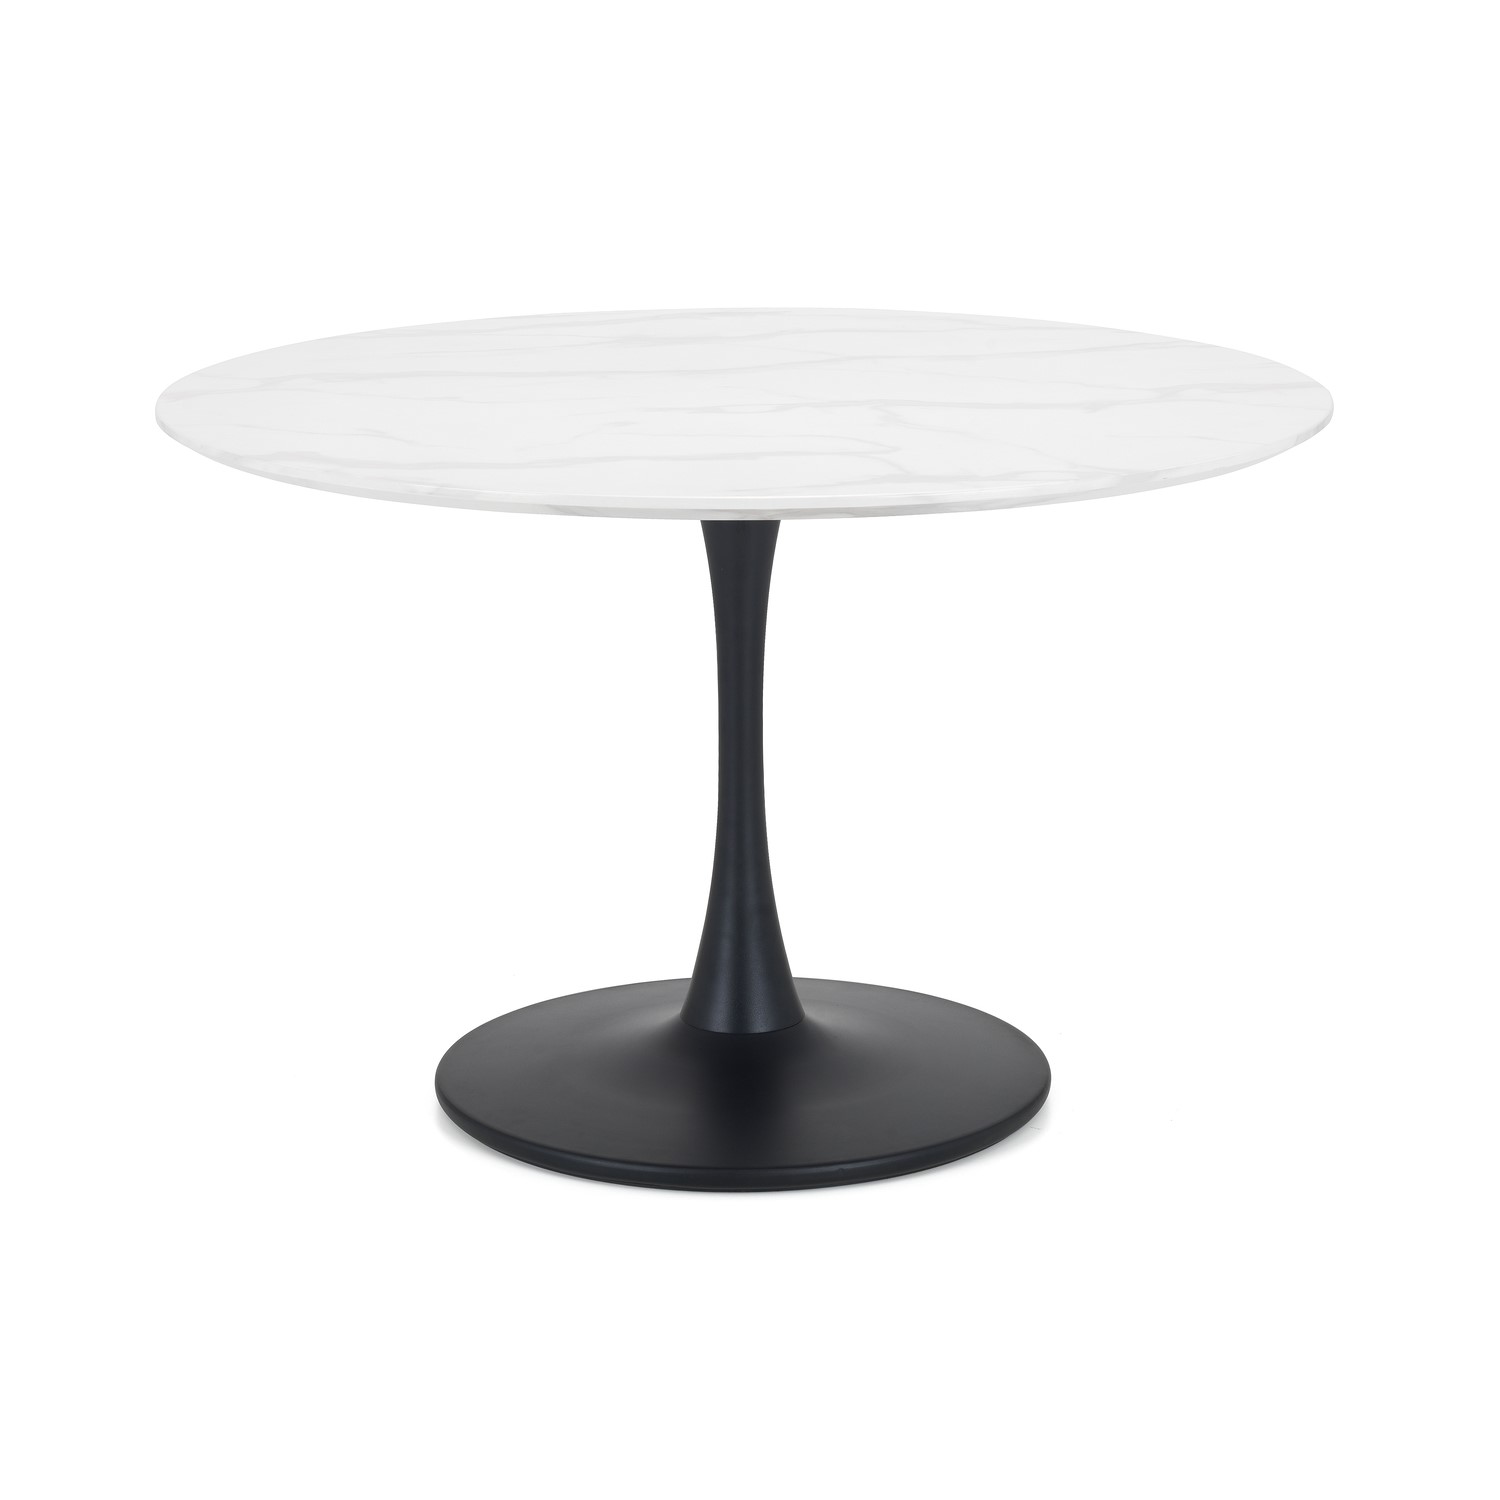 Photo of Round marble dining table - seats 4 - julian bowen